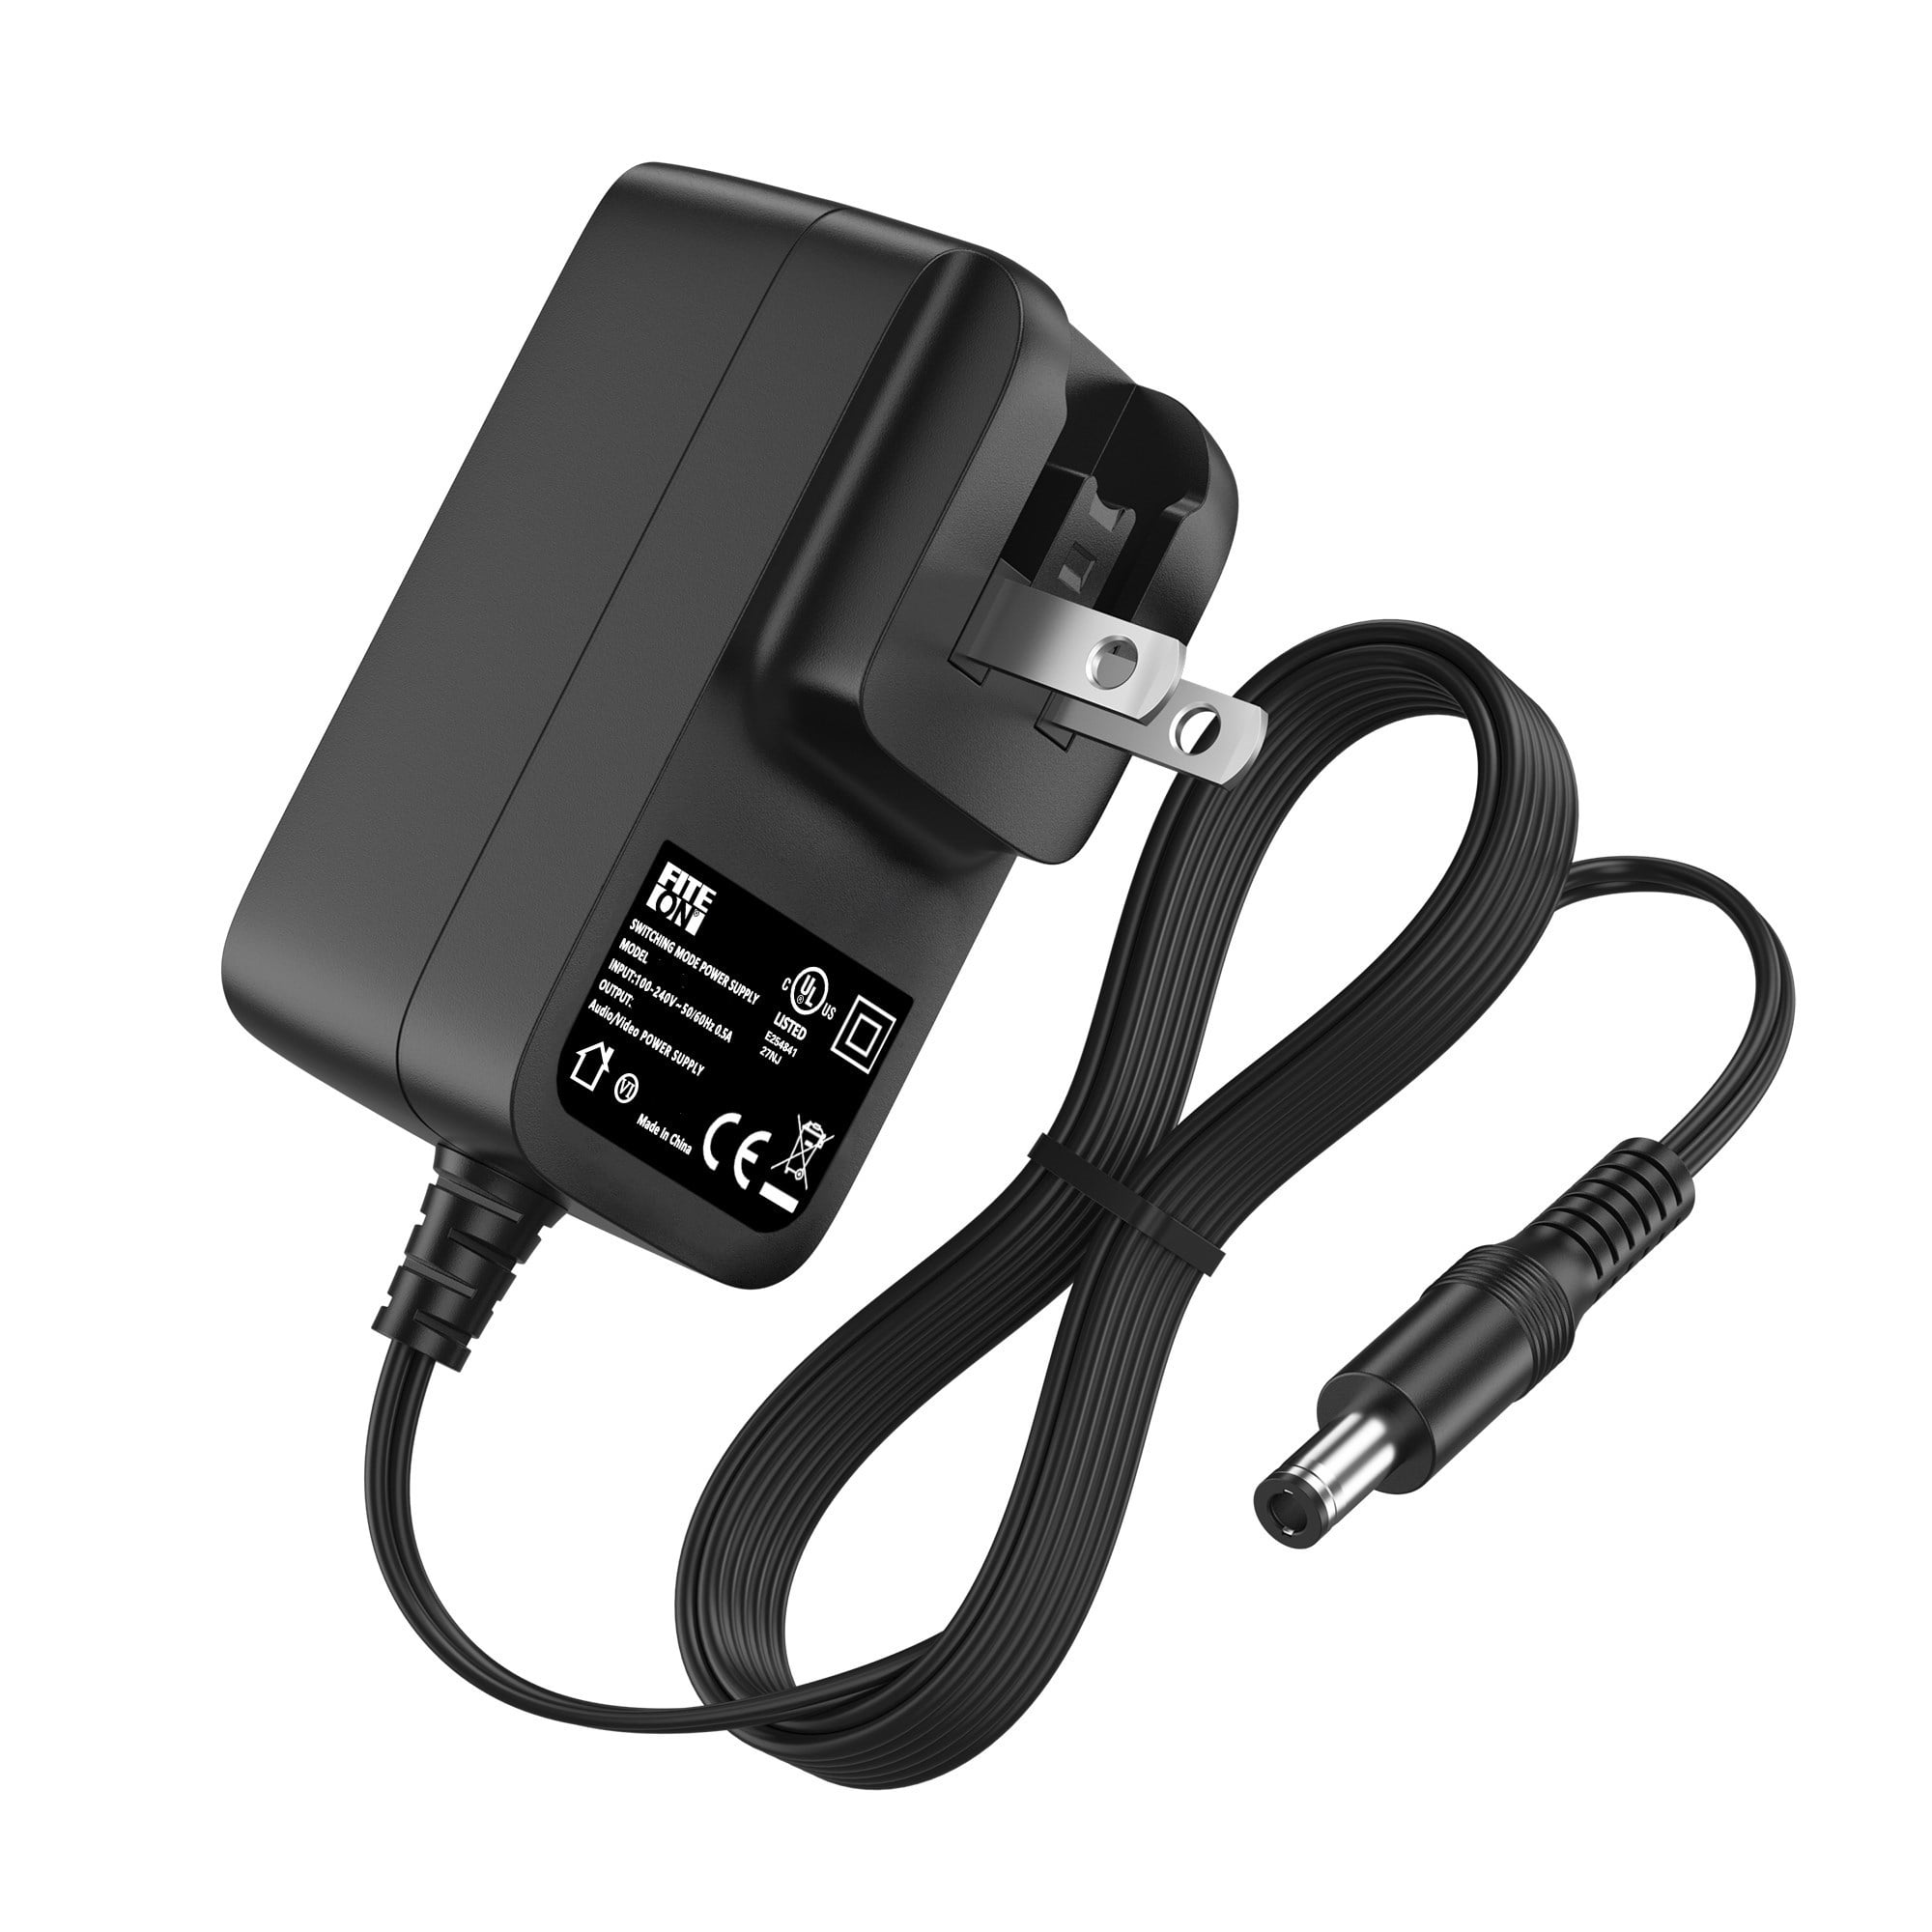 AC DC Adapter for Actiontec Century link DSL Modem PK5001A Power Supply Charger